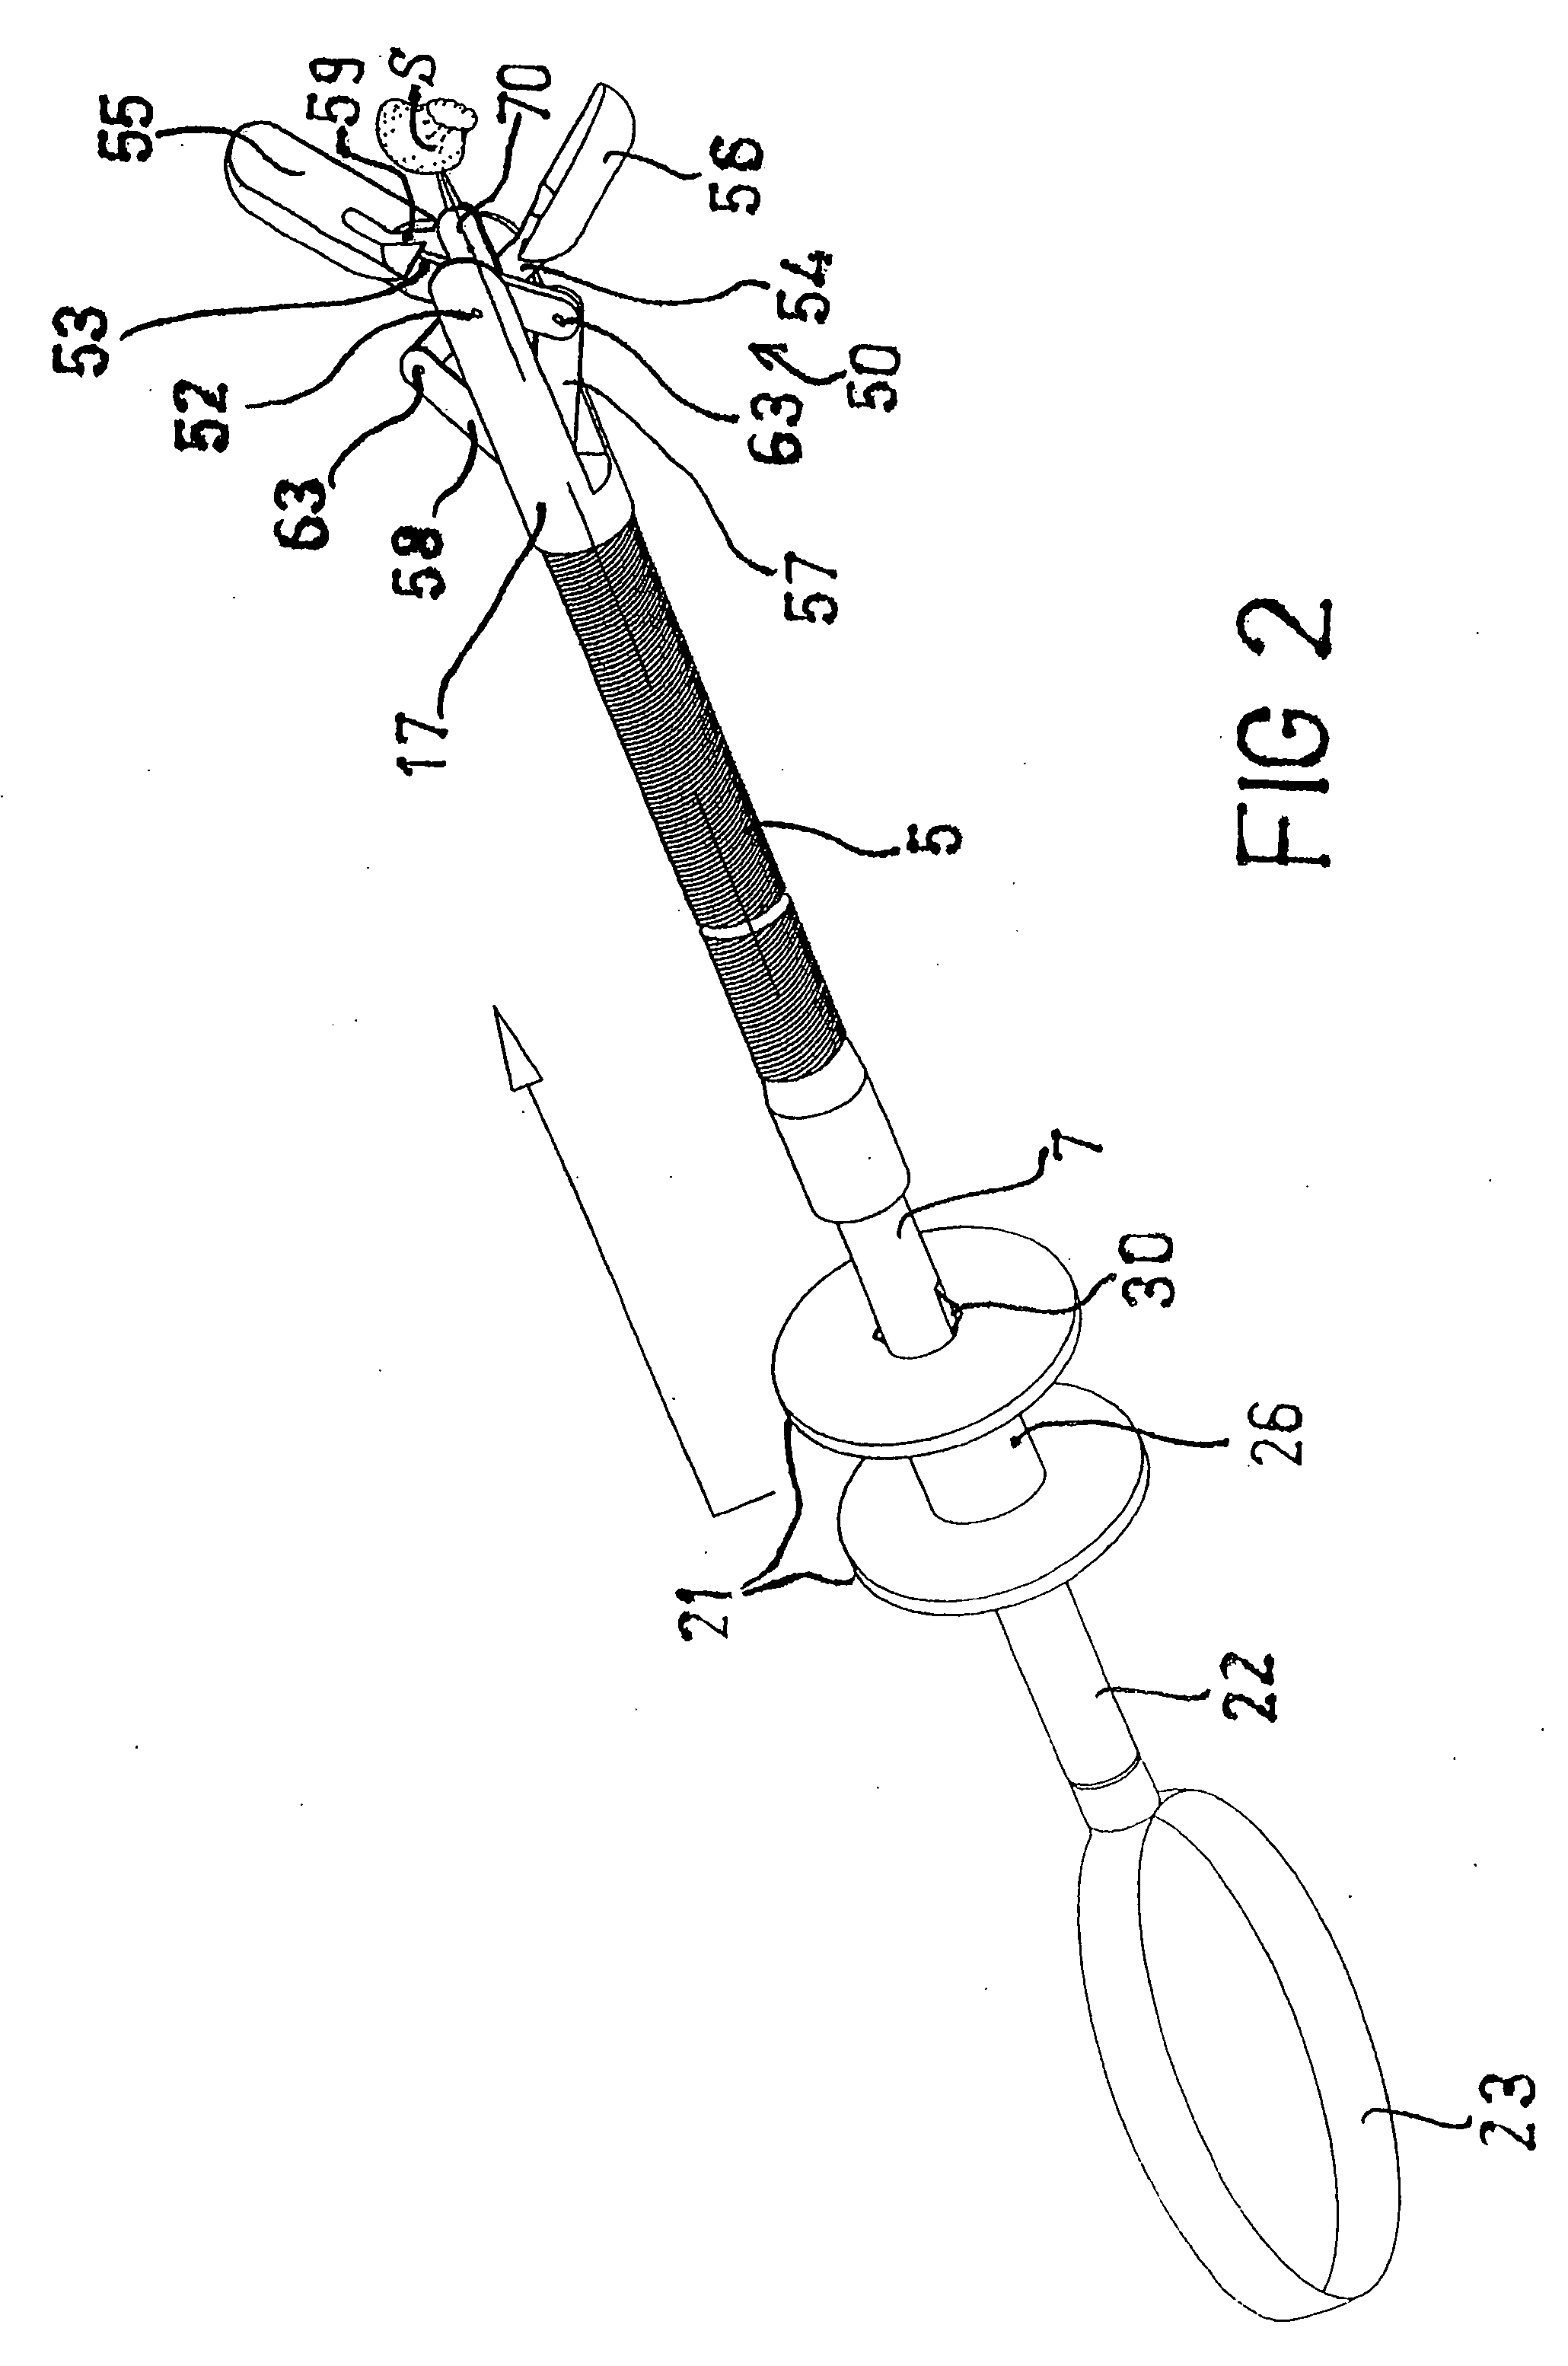 Needle biopsy forceps with integral sample ejector